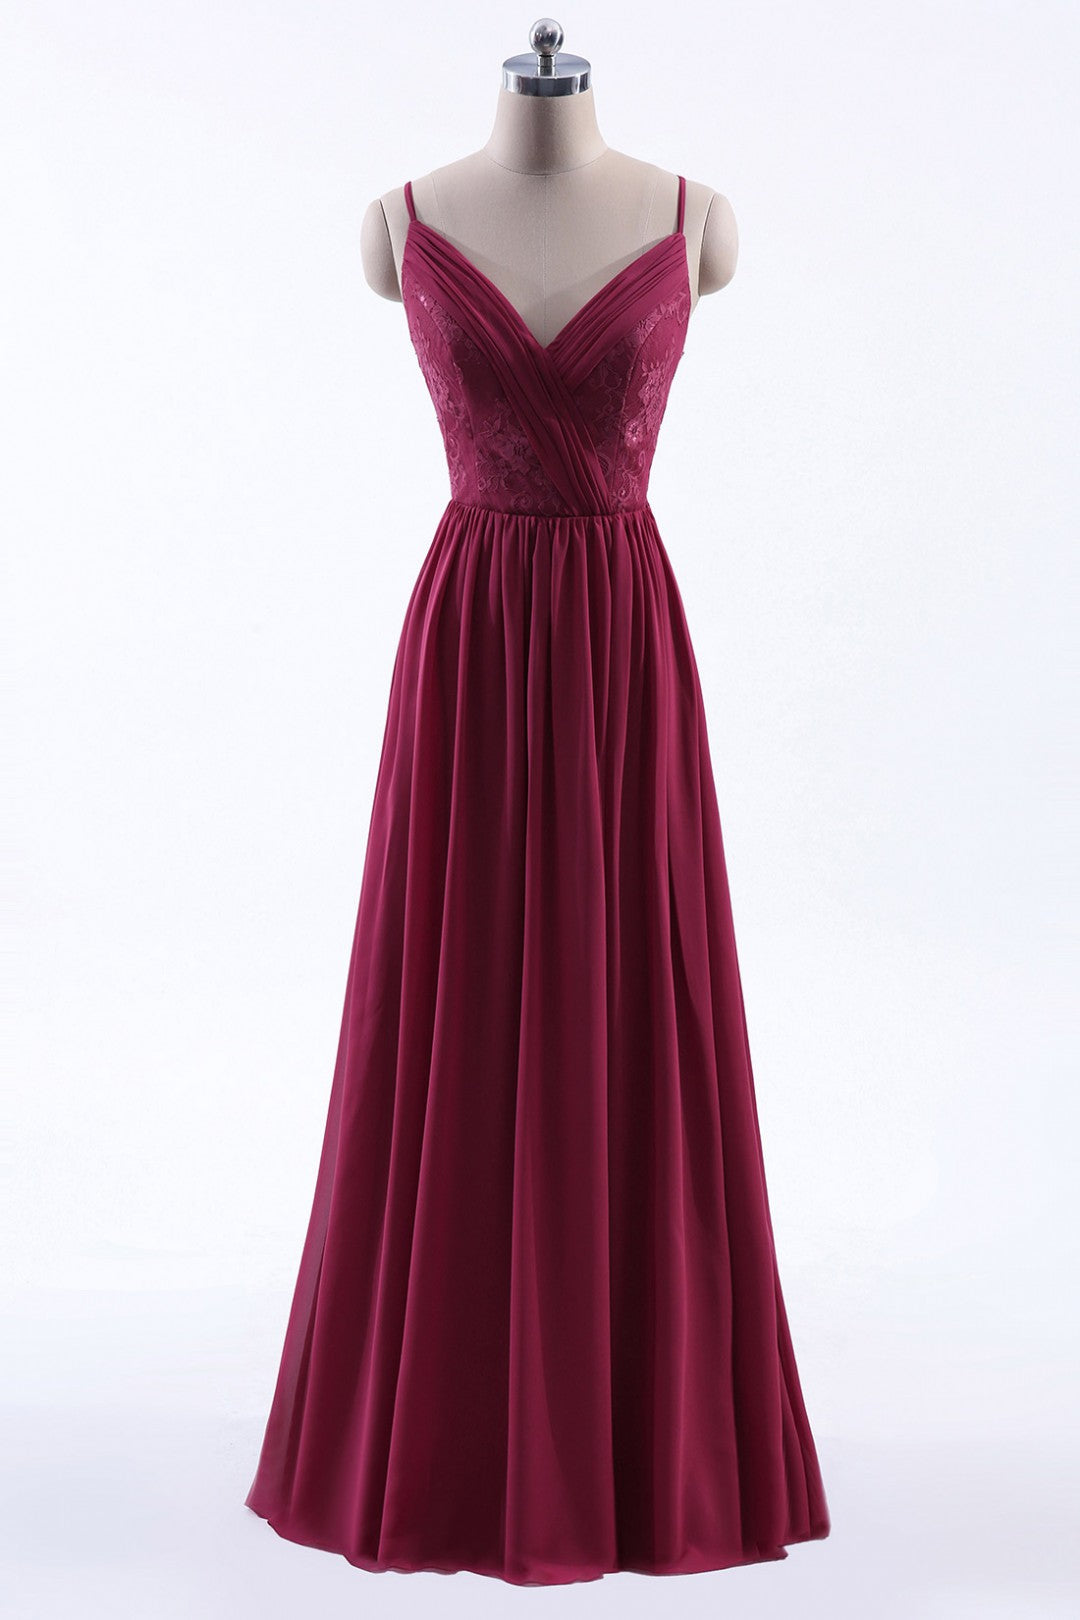 Evening Dresses With Sleeves, Wine Red Chiffon A-line Long Pleated Bridesmaid Dress